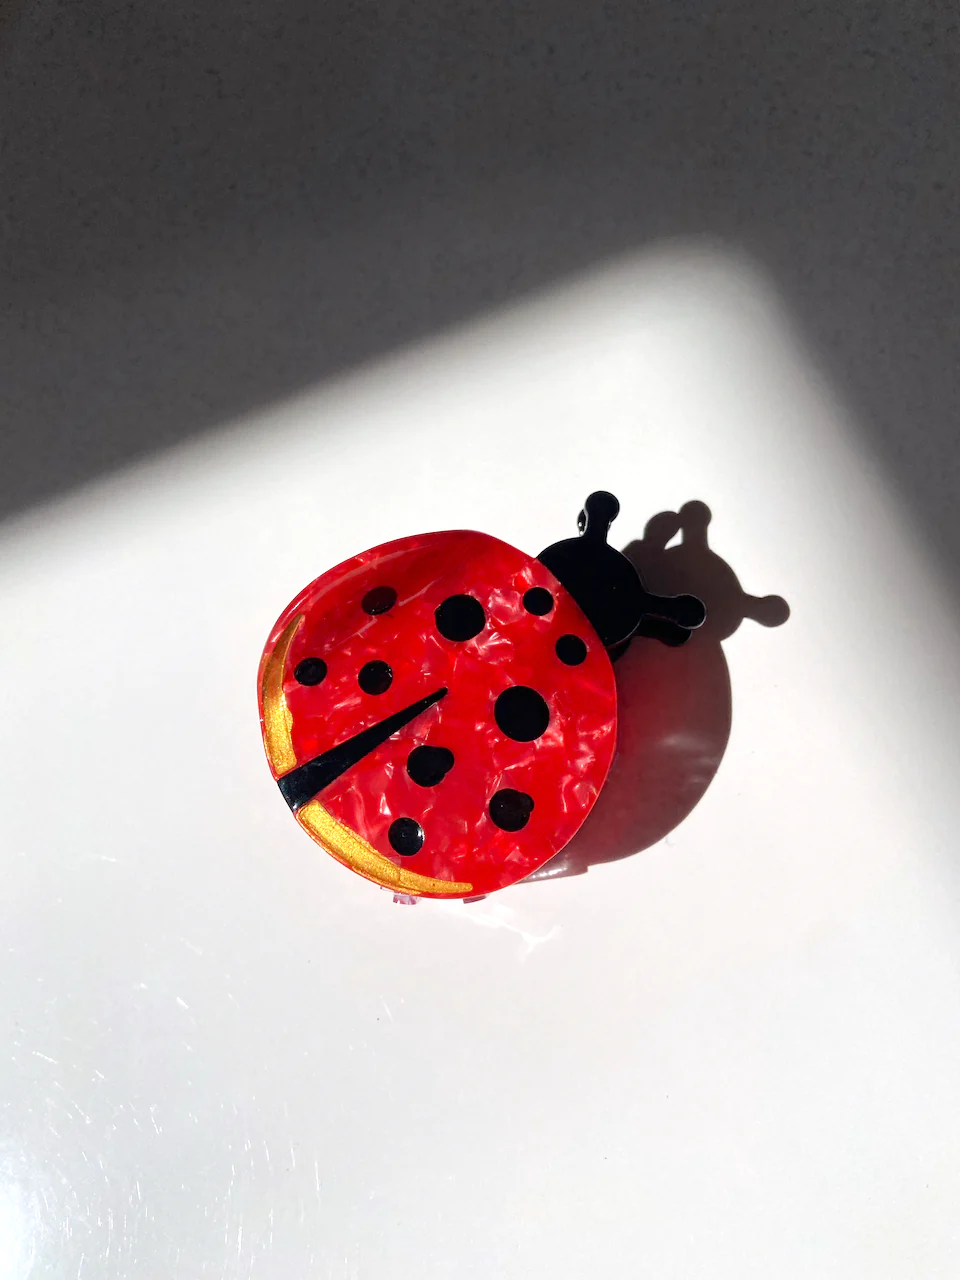 LADY BUG CLAW CLIP SITTING ON A WHITE BACKGROUND. RED CIRCLE WITH10 BLACK DOTS OF VARIOUS SIZES WITH A SMALL BLACK PIE SHAPE CUT OUT TO DEFINE THE LADYBUGS WINGS. 